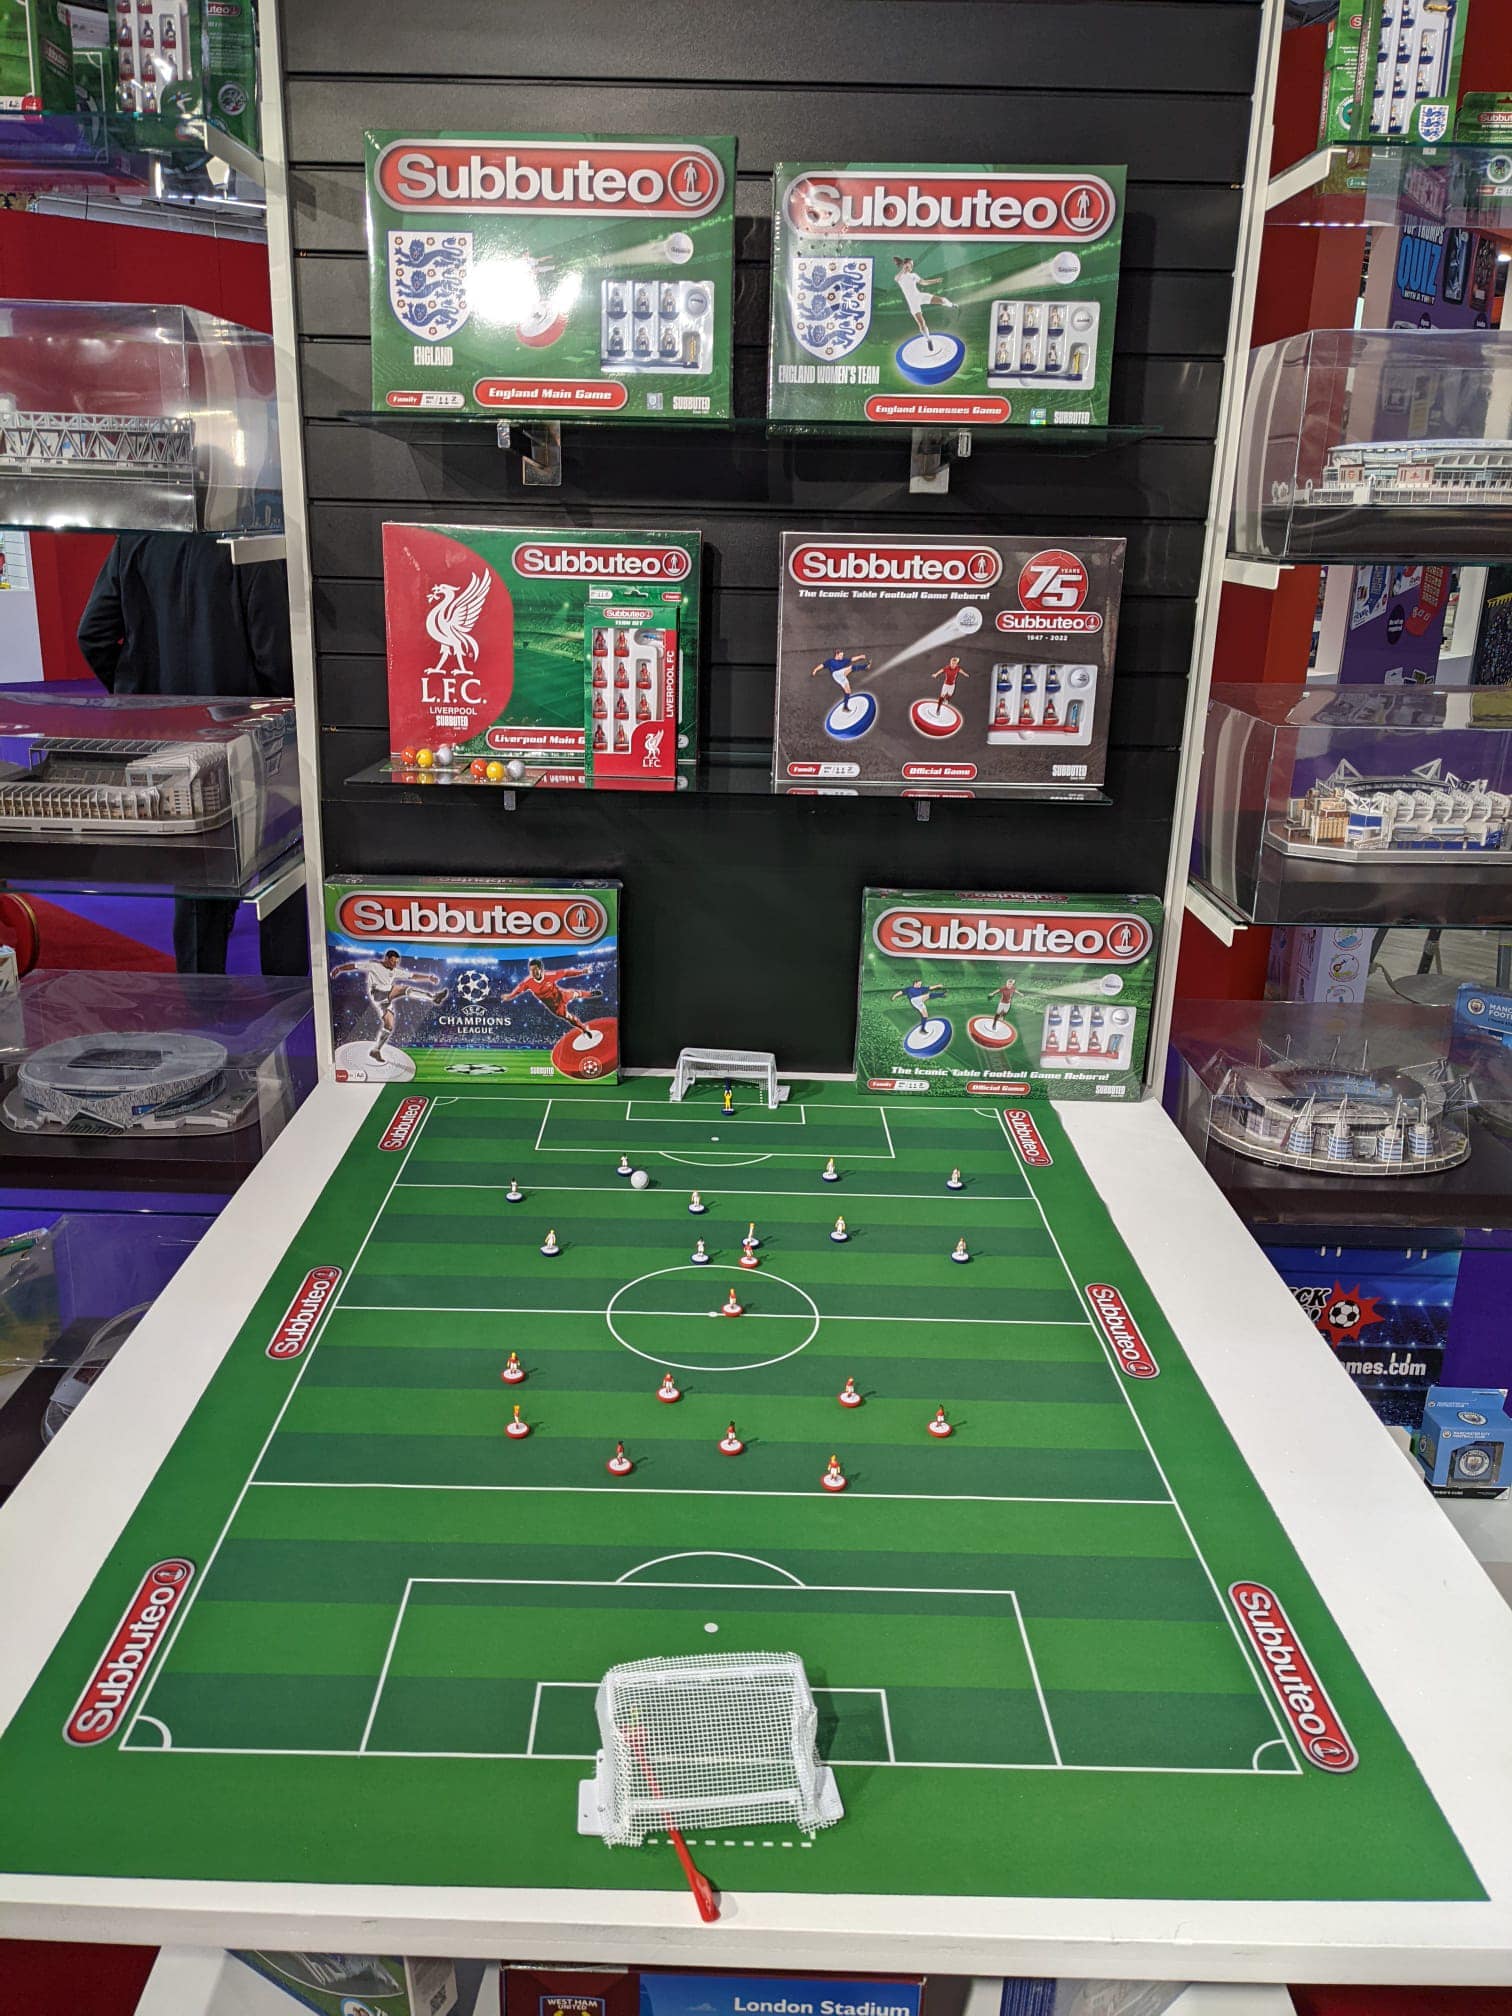 Subbuteo reveals Deluxe pitch, 75th Anniversary and Liverpool FC sets for  2022